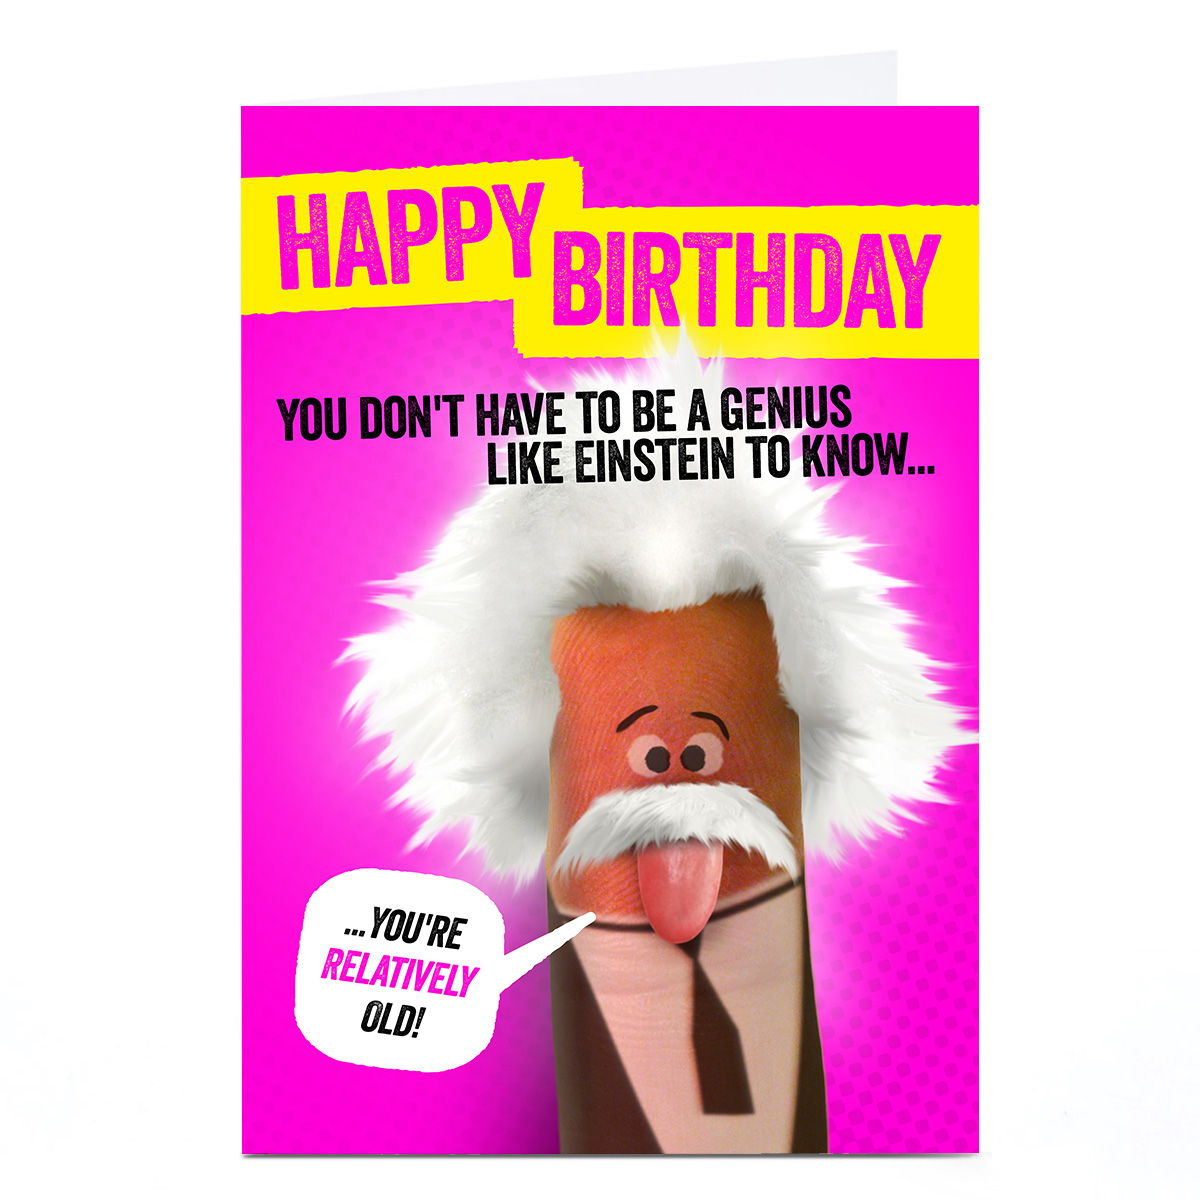 Personalised Finger Quips Birthday Card - You Don't Have To Be A Genius